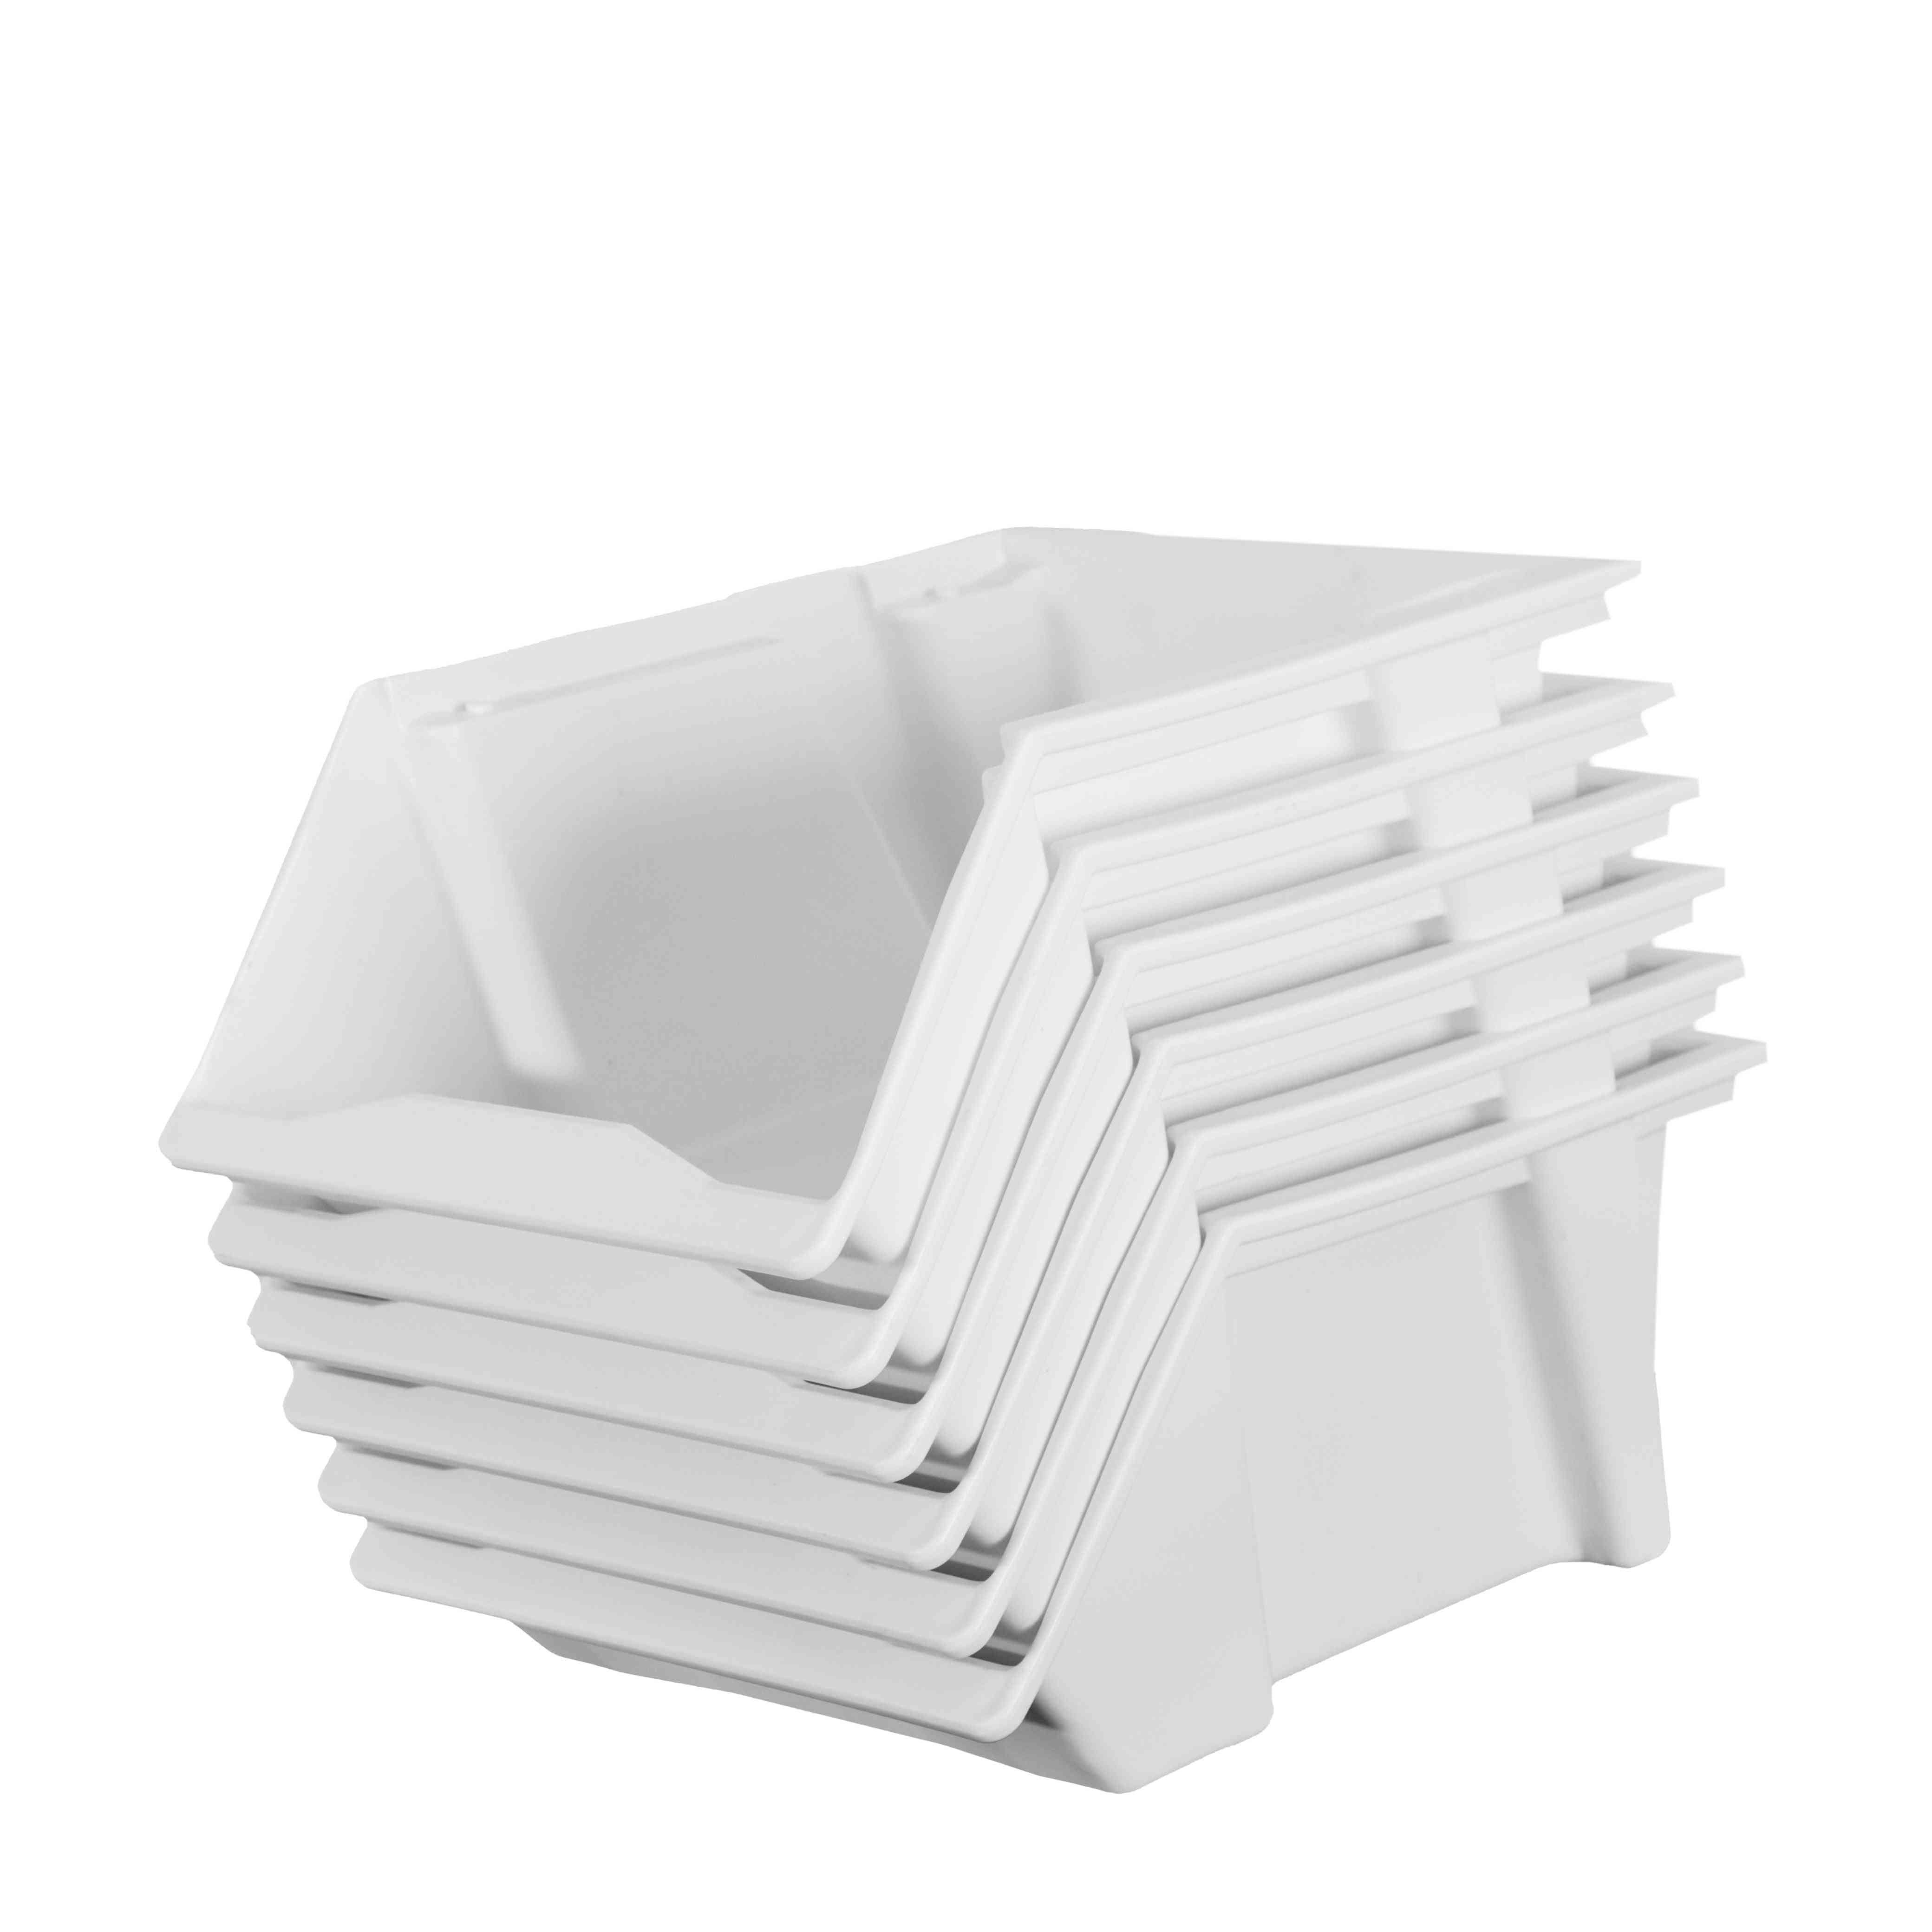 6 white Boer Shelf Pack Bins nested into each other